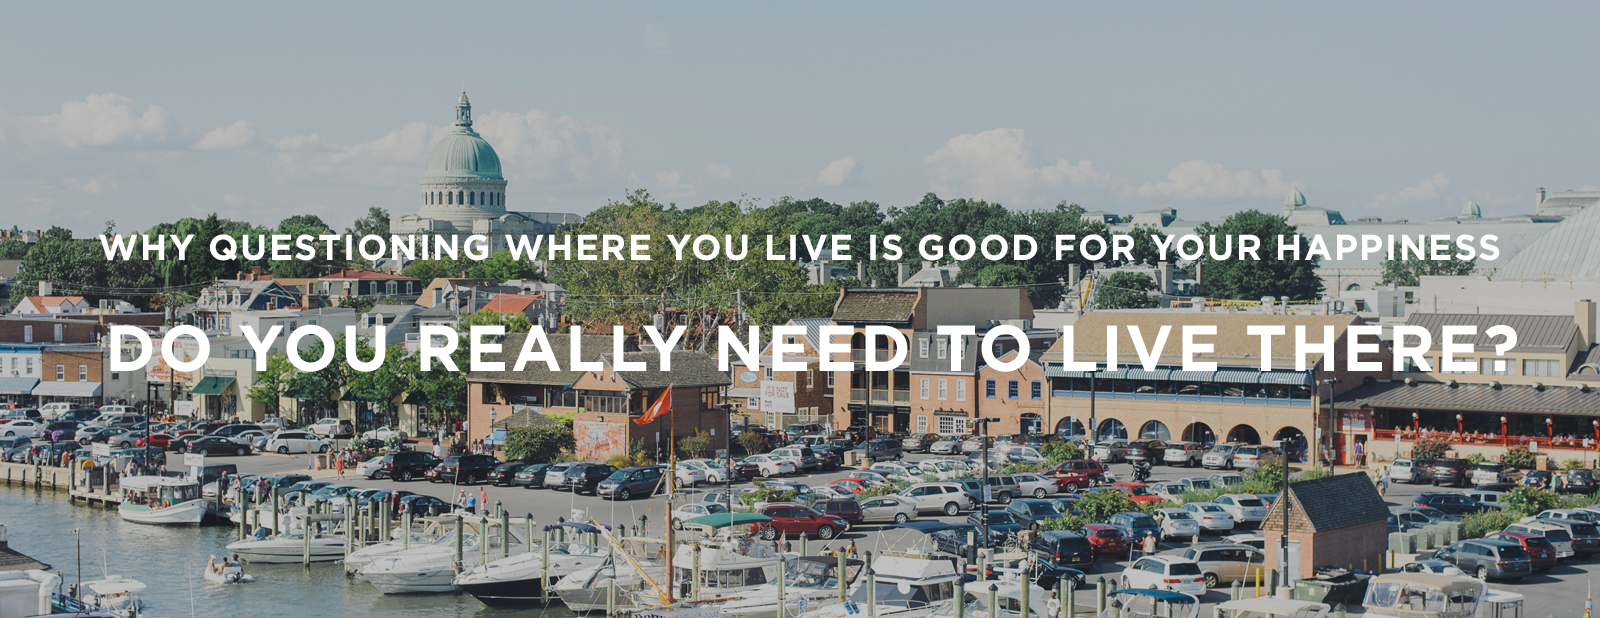 Do you really need to live there? | via the Rising Tide Society